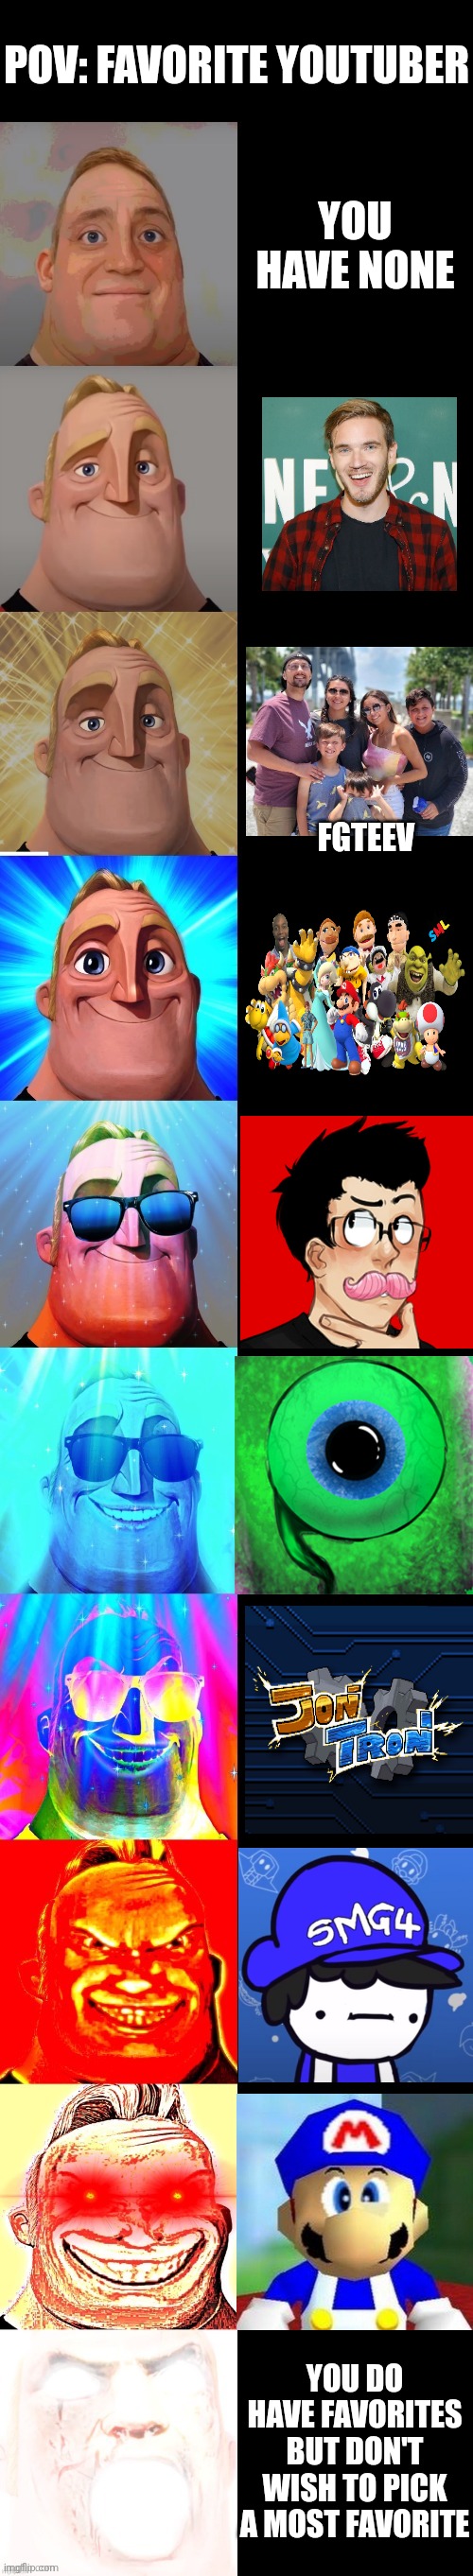 mr incredible becoming canny | POV: FAVORITE YOUTUBER; YOU HAVE NONE; FGTEEV; YOU DO HAVE FAVORITES BUT DON'T WISH TO PICK A MOST FAVORITE | image tagged in mr incredible becoming canny,smg4,markiplier,jacksepticeye,pewdiepie,youtubers | made w/ Imgflip meme maker